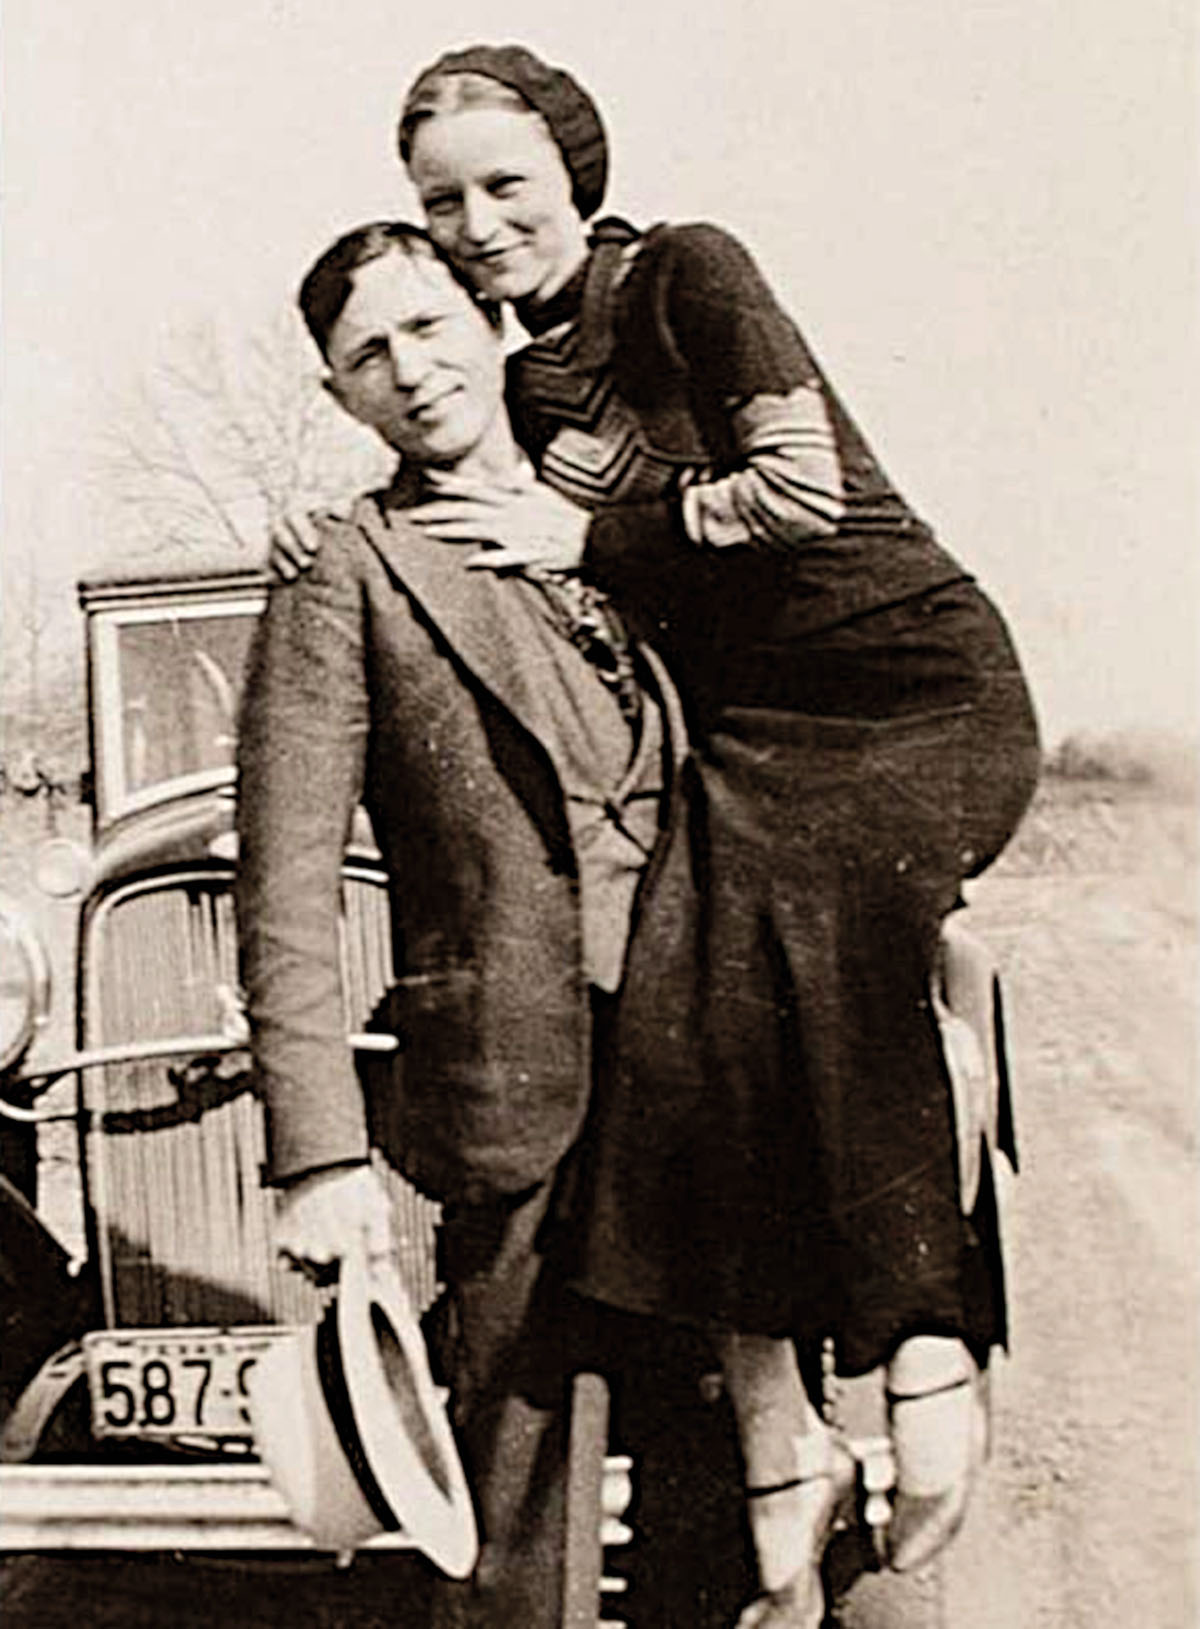 What Do We Really Know About Bonnie and Clyde and Their Legacy in Dallas?